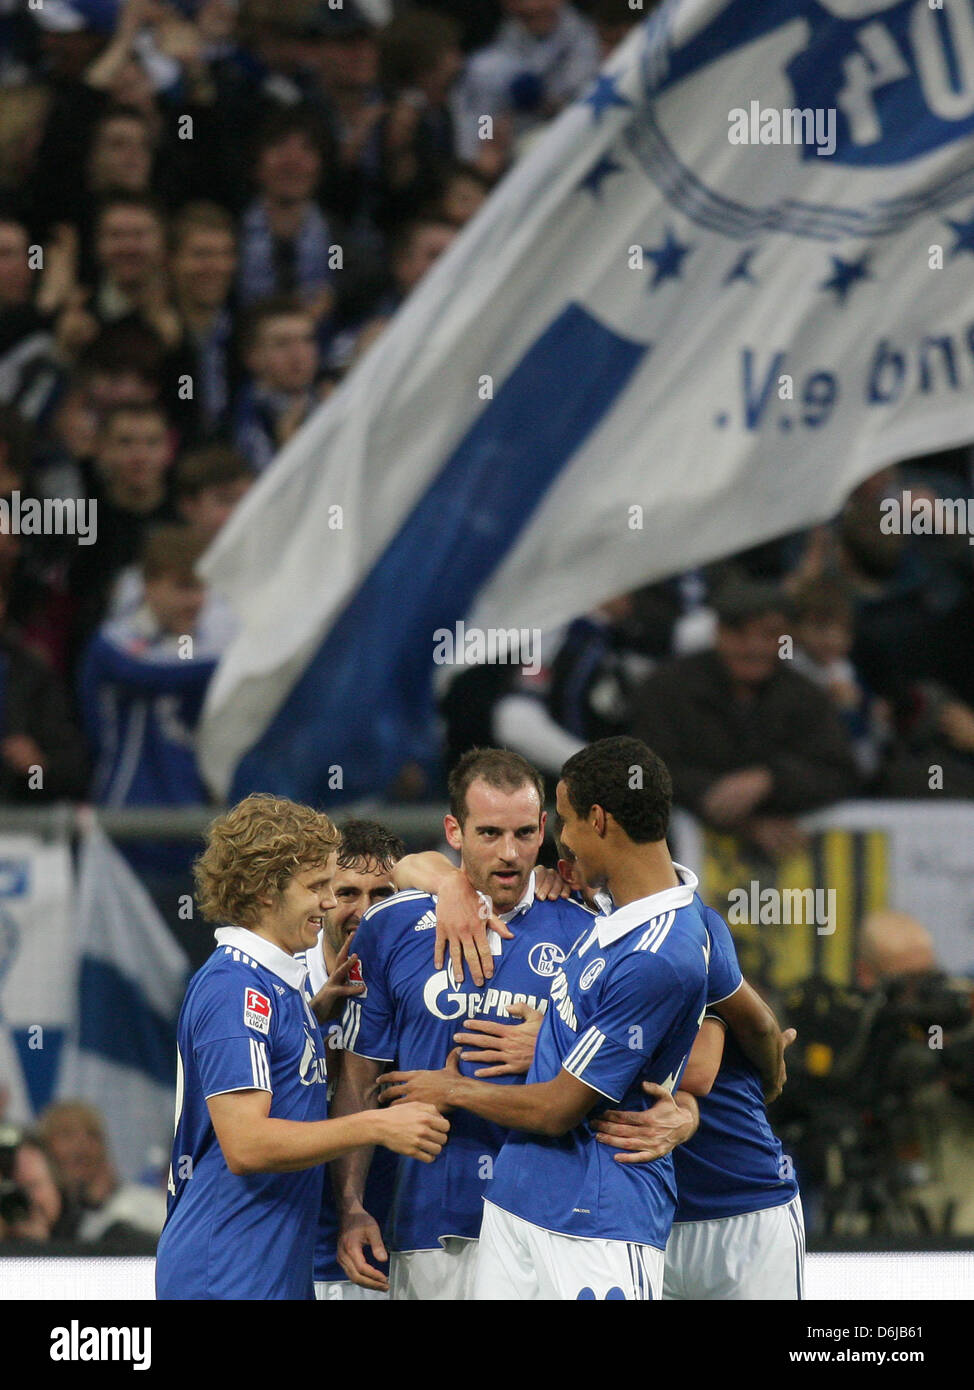 Schalke's Christoph Metzelder (C) celebrates his 2-0 goal with team-mates Teemu Pukki (L) and Joel Matip during the Bundesliga soccer match between FC Schalke 04 and Hamburger SV at Veltins Arena in Gelsenkirchen, Germany, 11 March 2012. Photo: Rolf Vennenbernd  (ATTENTION: EMBARGO CONDITIONS! The DFL permits the further utilisation of the pictures in IPTV, mobile services and othe Stock Photo